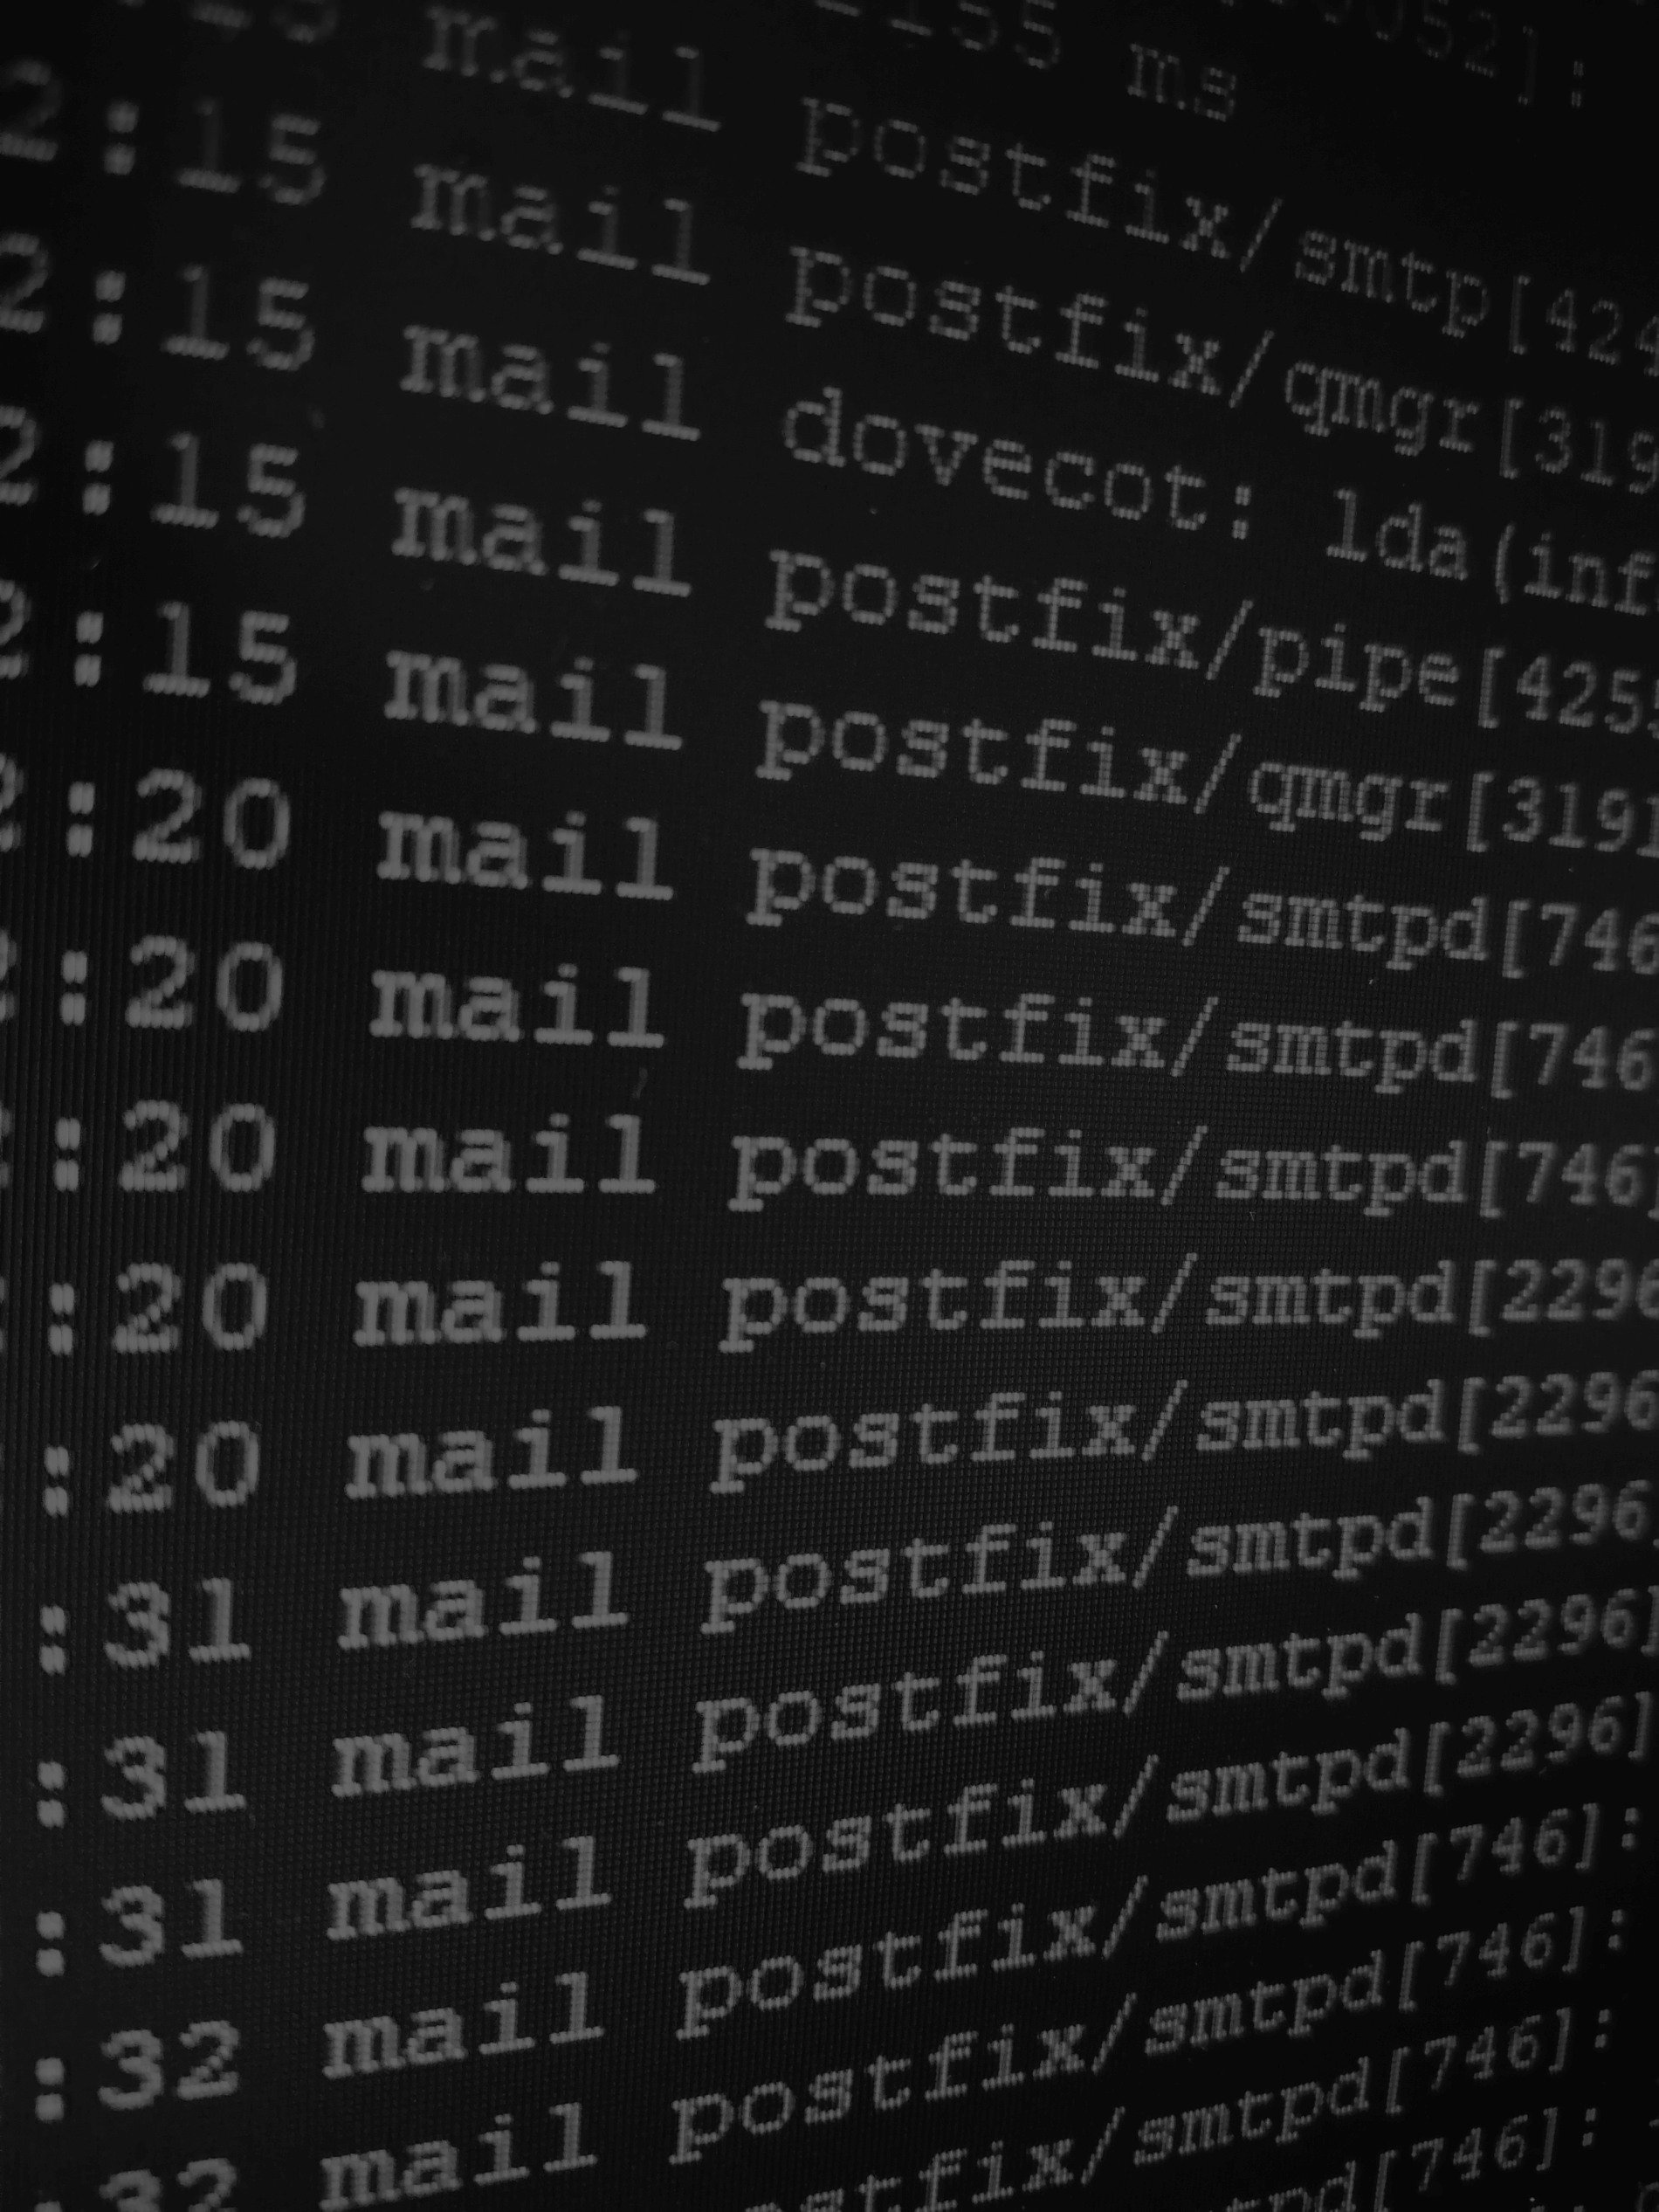 POSTFIX: How to set up sending emails from an IPv4 address